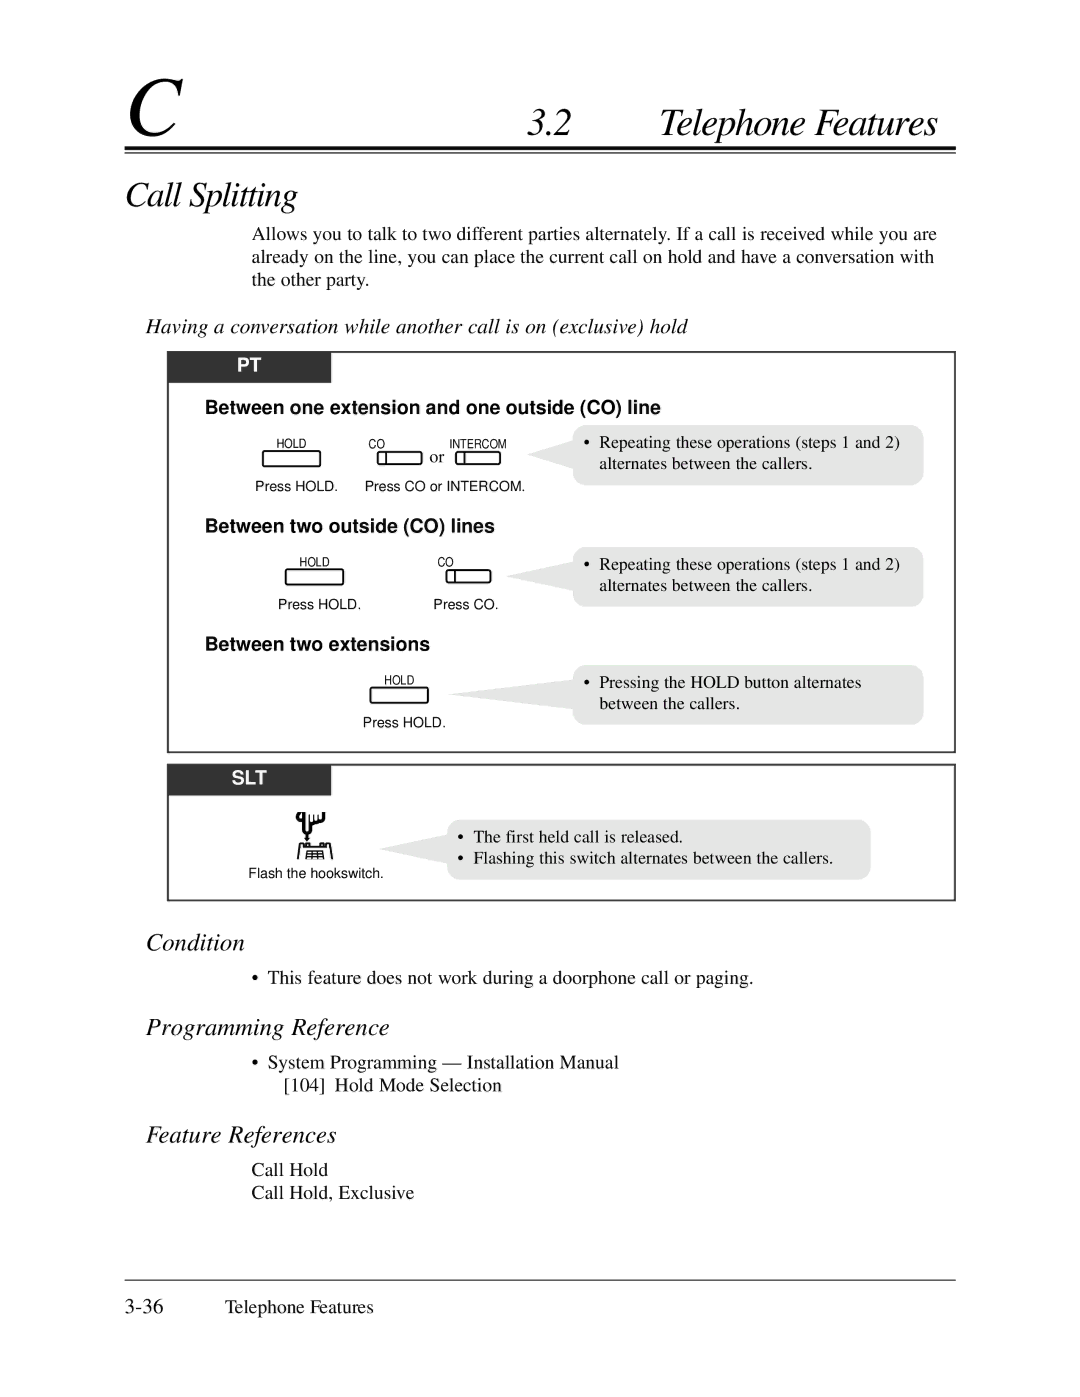 Panasonic KX-TA624 user manual Call Splitting, Between one extension and one outside CO line, Between two outside CO lines 